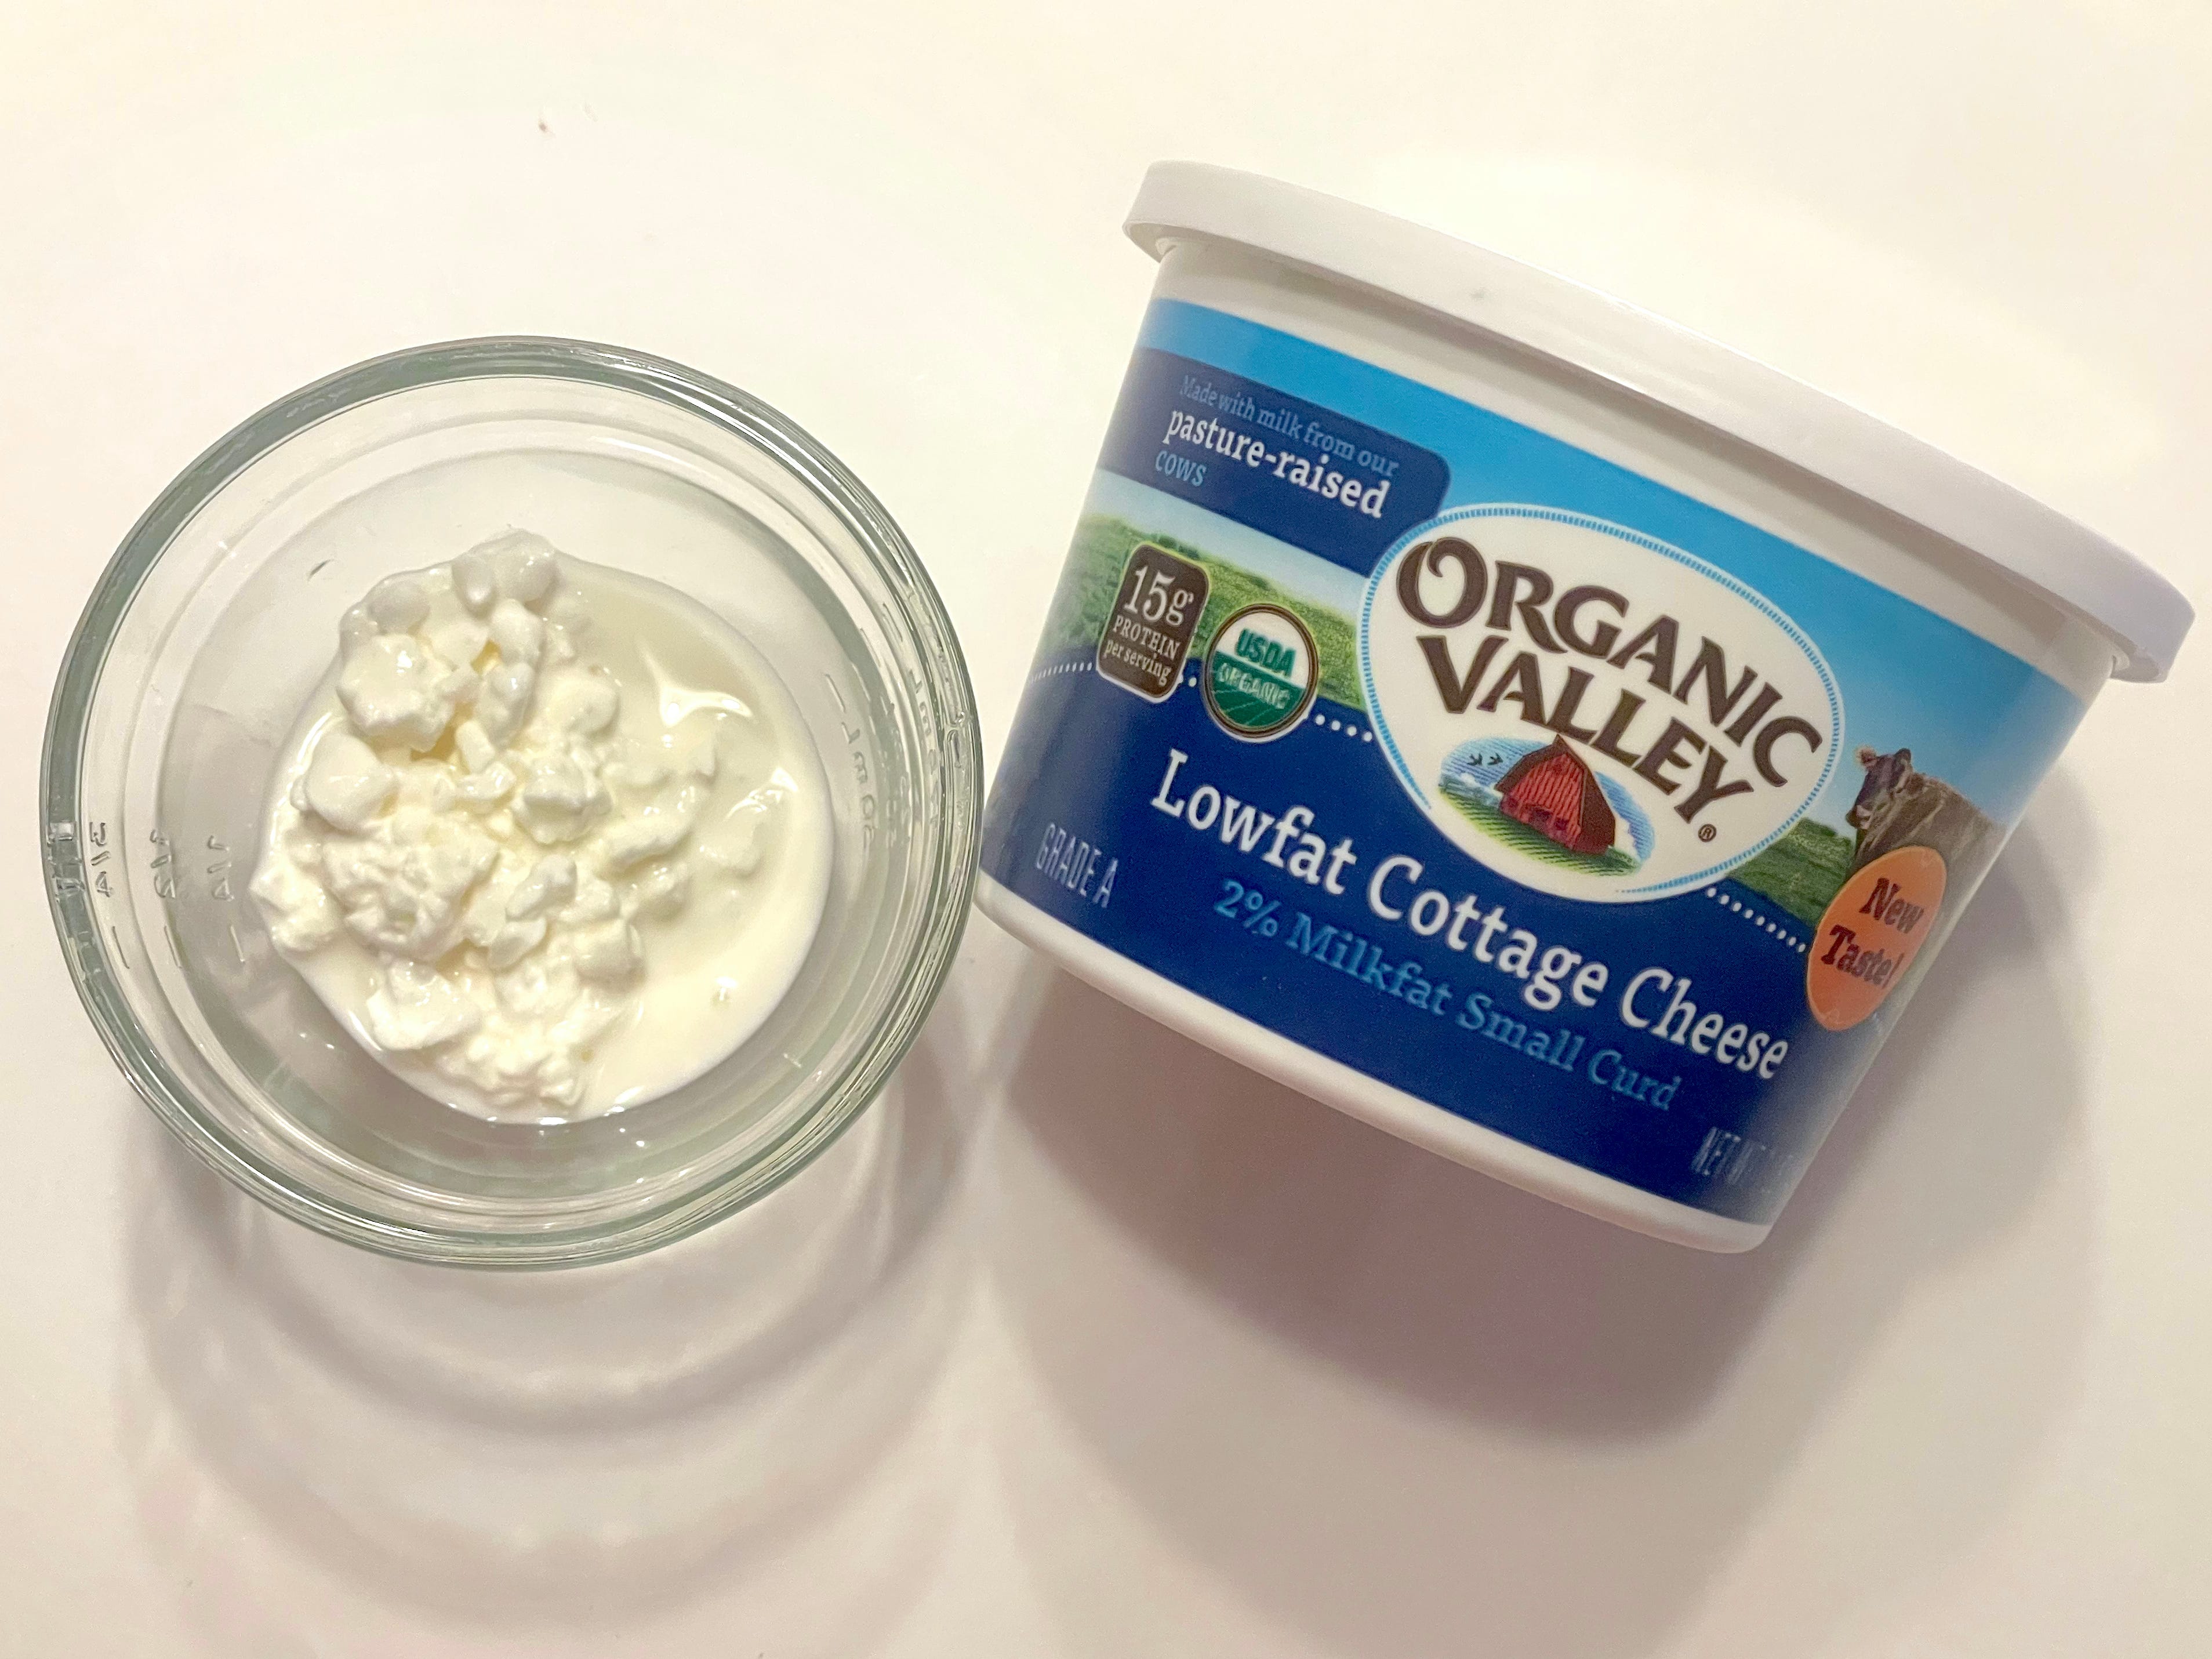 I tried 6 brands of cottage cheese to find the best one to buy right now